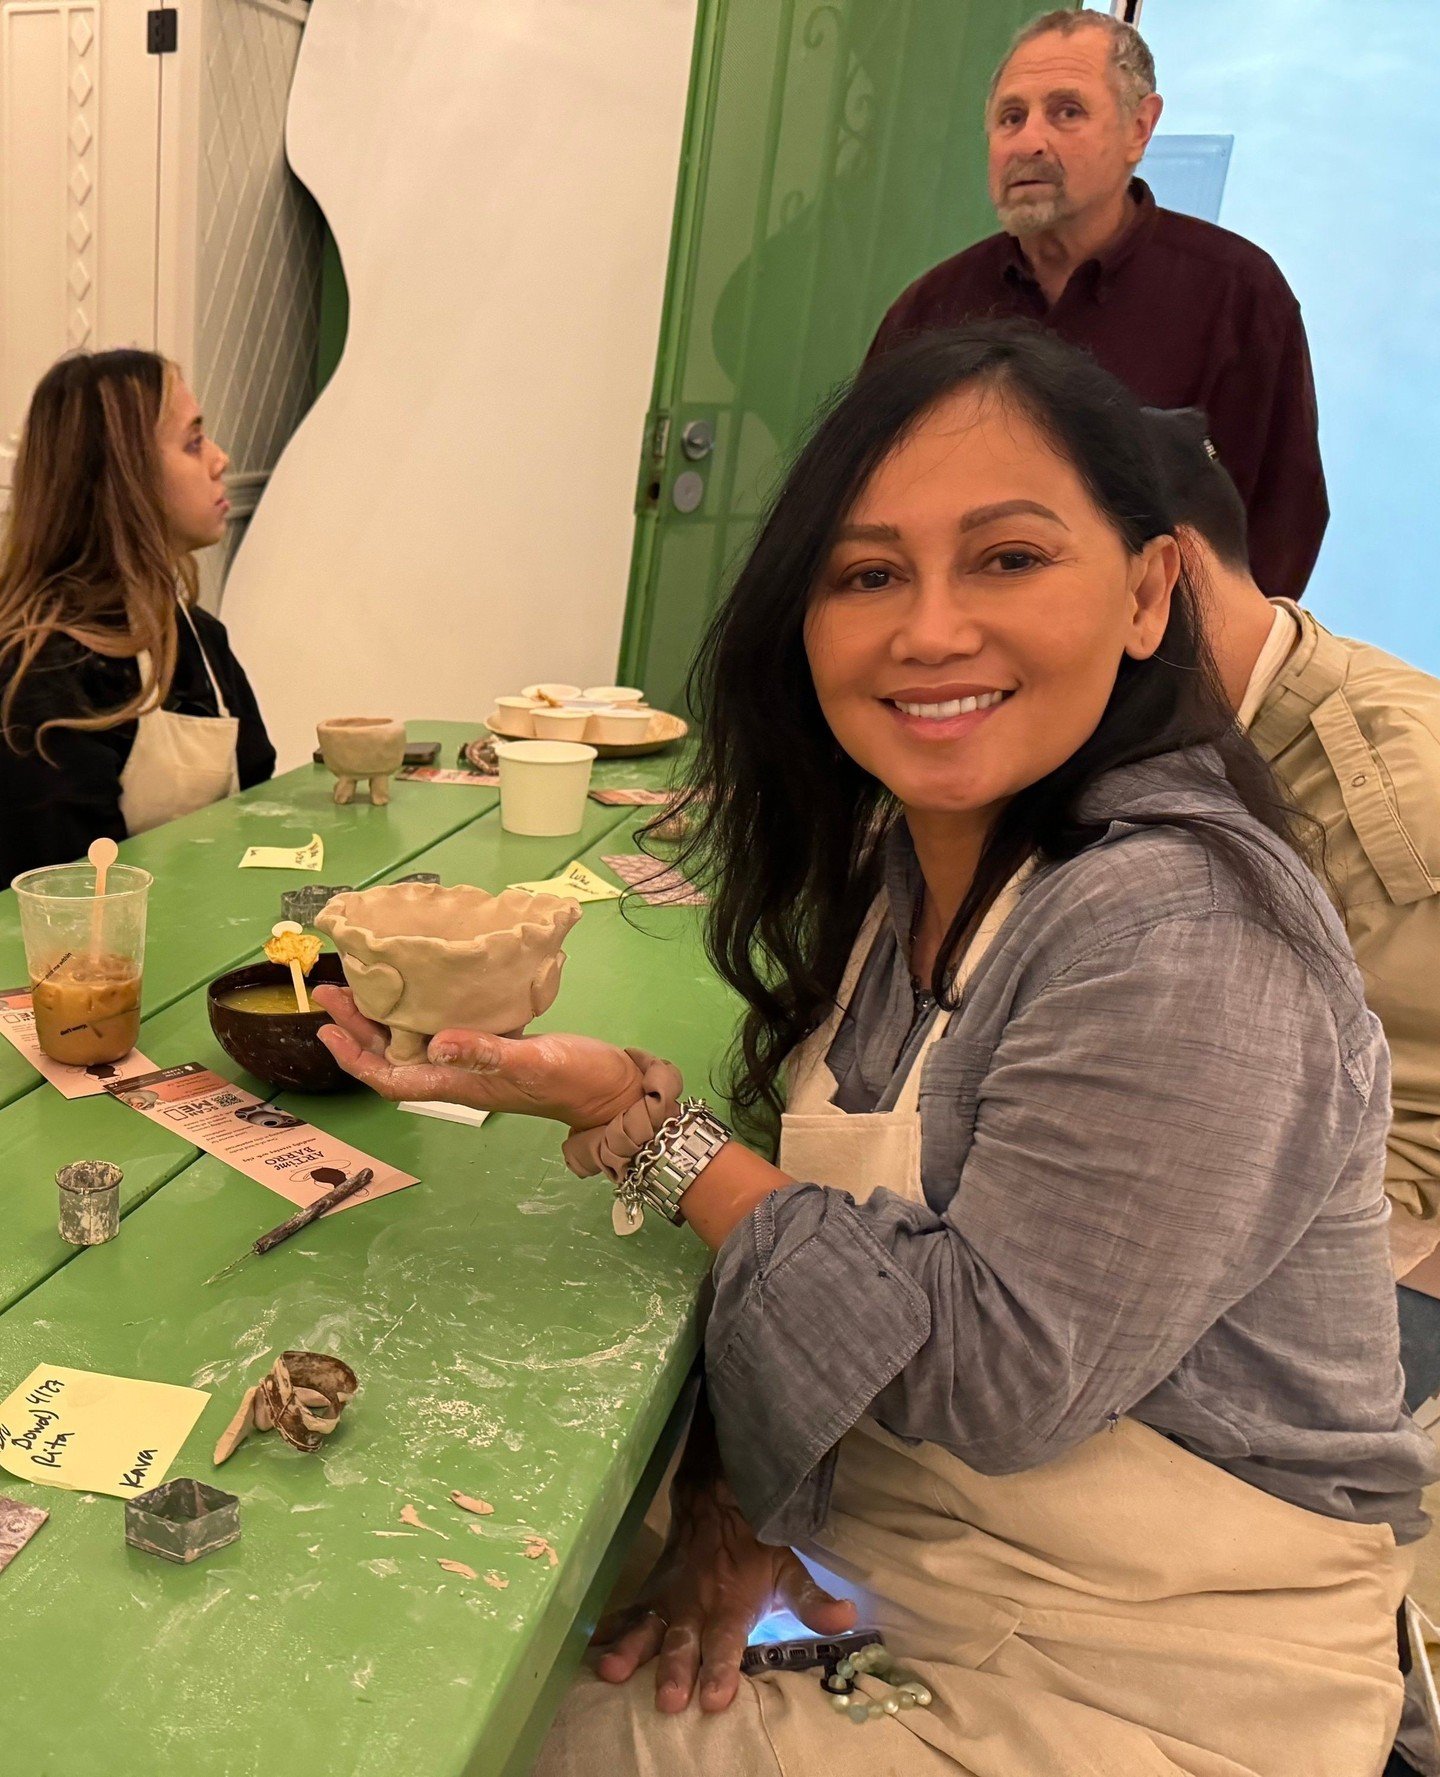 Thanks to everyone who came out to our Cava &amp; Clay workshop in Santa Monica, we had a blast. Stay tuned for more Santa Monica workshops!